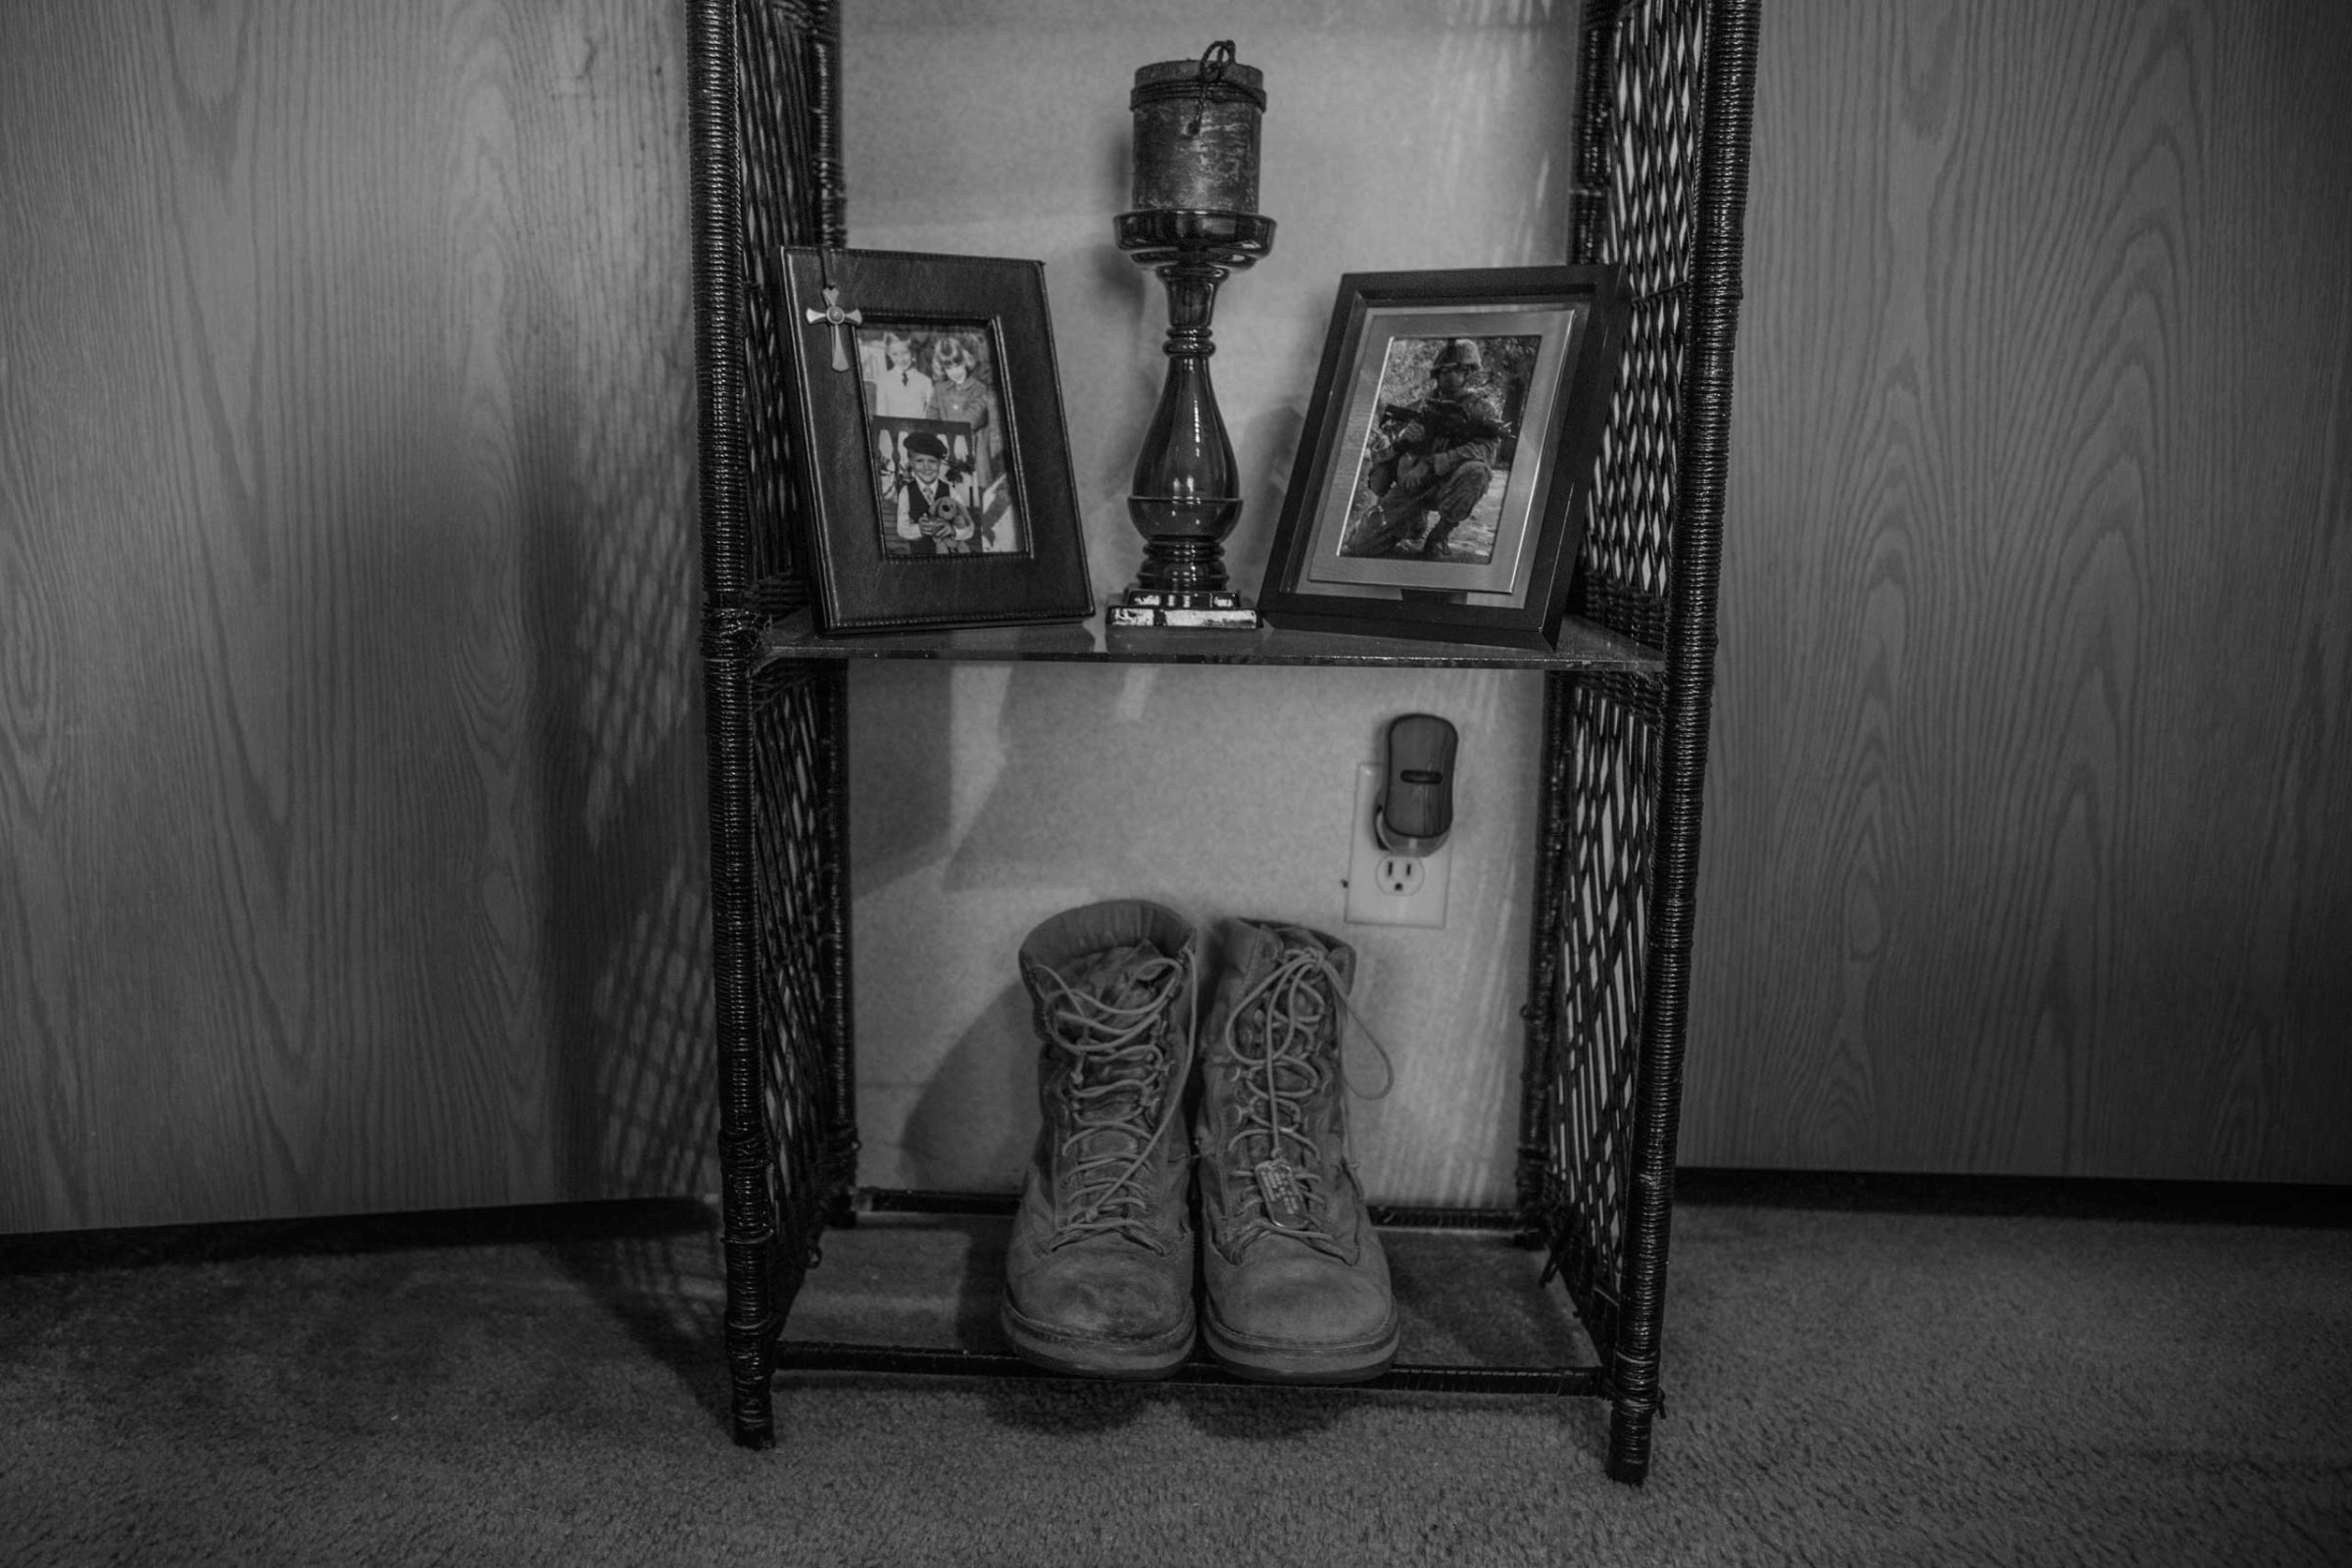 Brandon Ladner. Pelham, Alabama.Brandon Ladner's Marine Corps boots sit on a small shelf in his bedroom. Brandon was a U.S. Marine Corps Veteran. He fought in Afghanistan's Helmand Province.Brandon, suffering from PTSD shot himself inside his living room. The bullet remains lodged in the ceiling of the home where his mother Renee now lives.